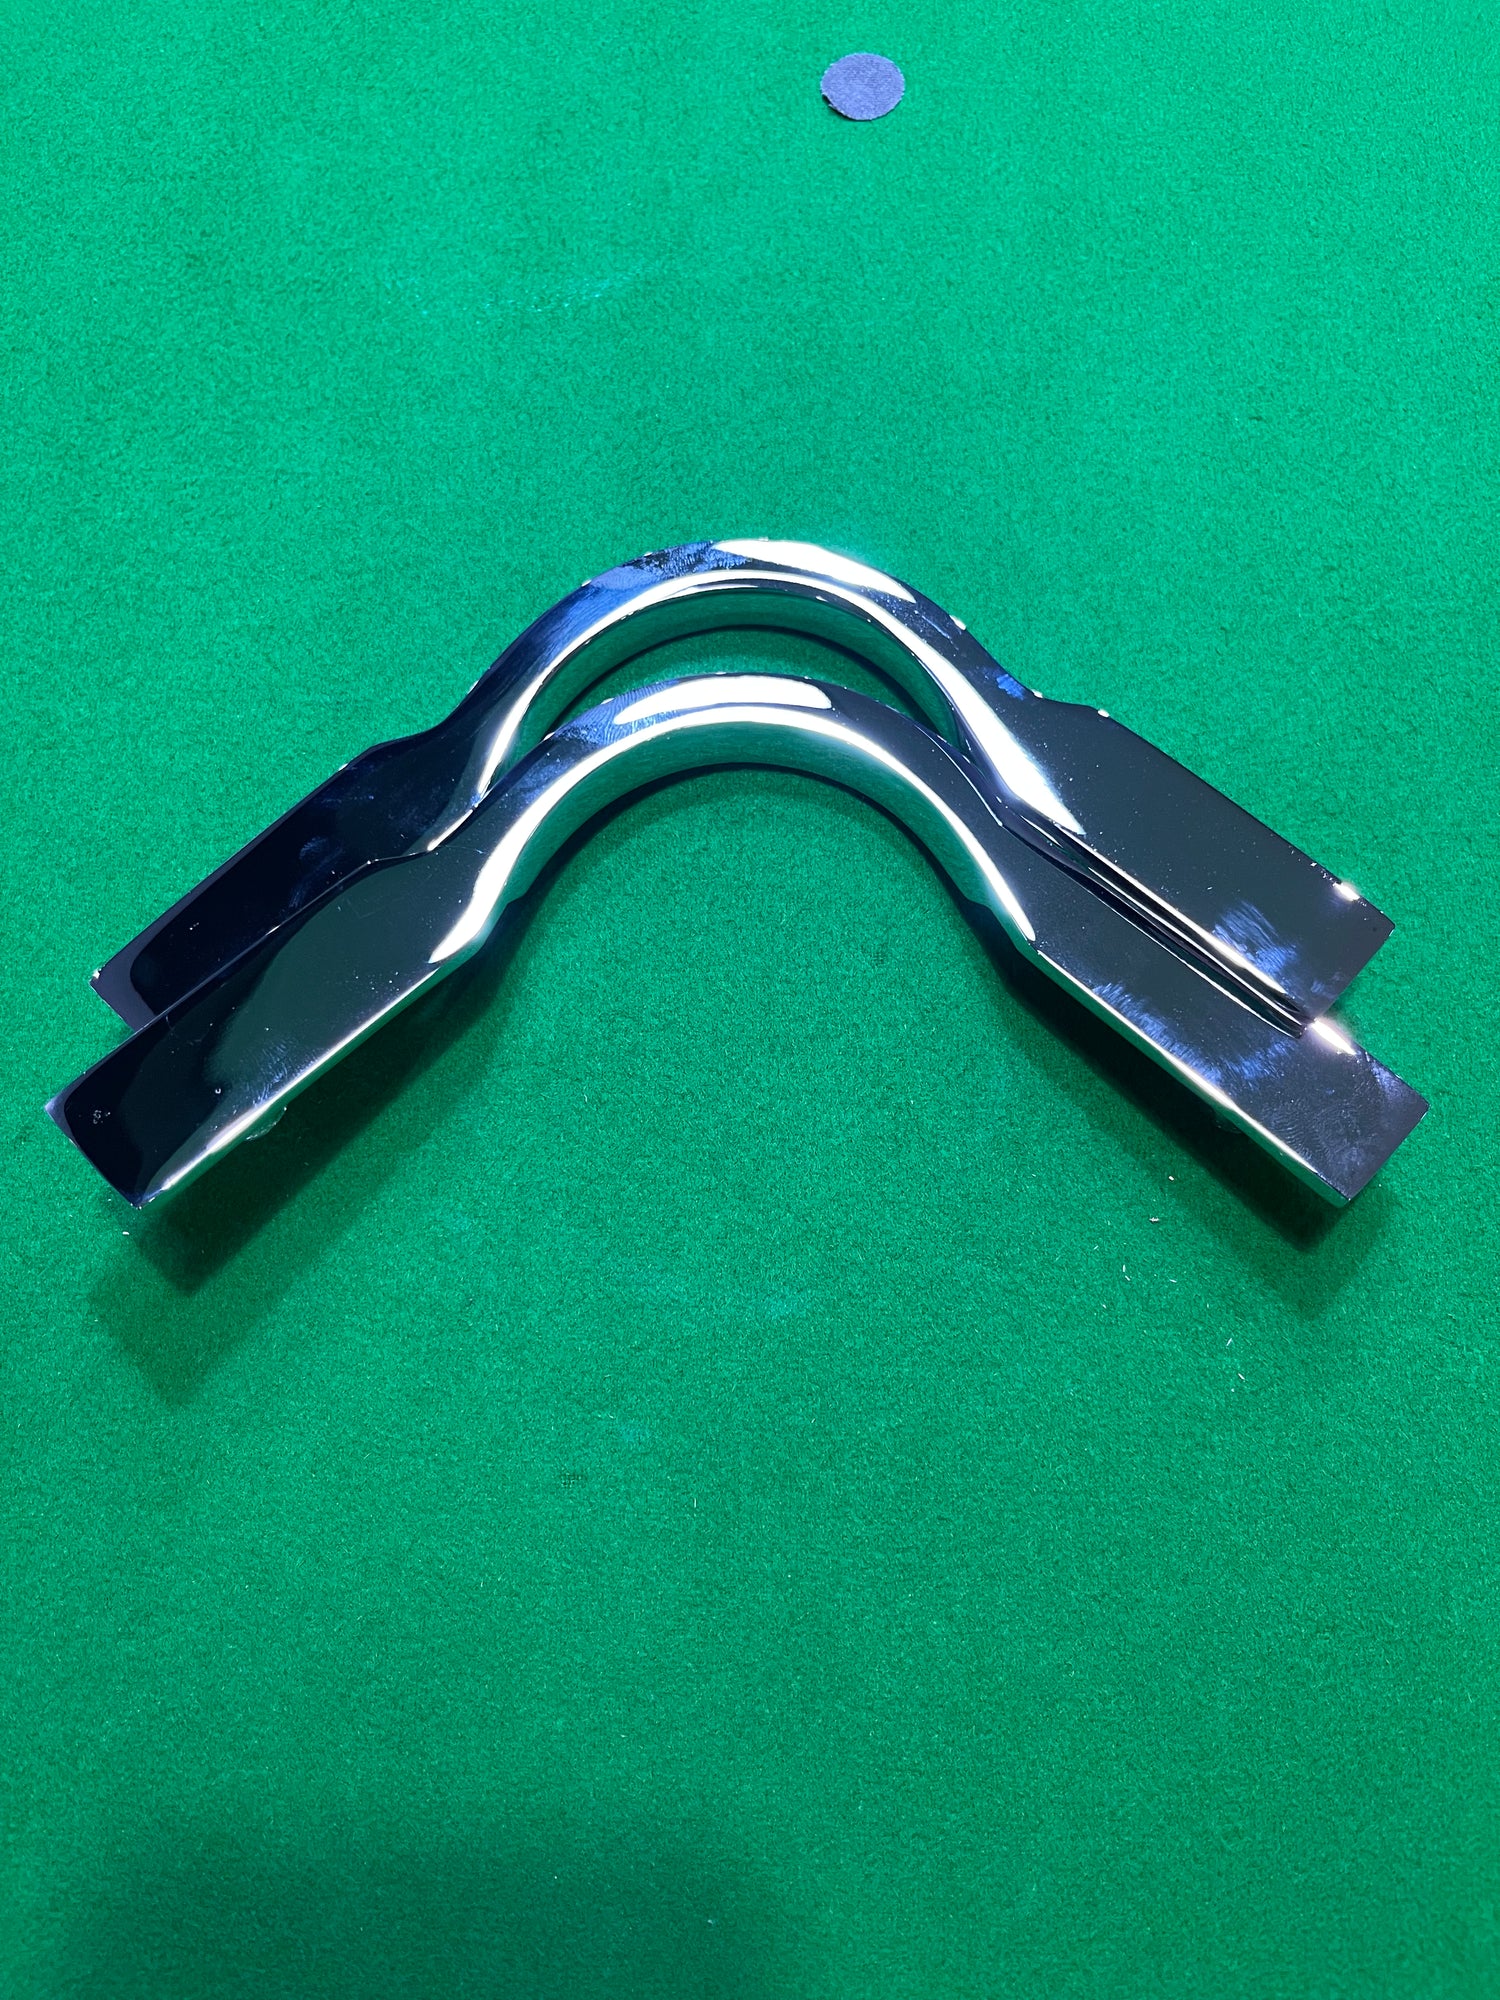 Deluxe Quality Solid Pool, Snooker, Billiard Table Pocket Brackets Heavy Boss Square - Q-Masters